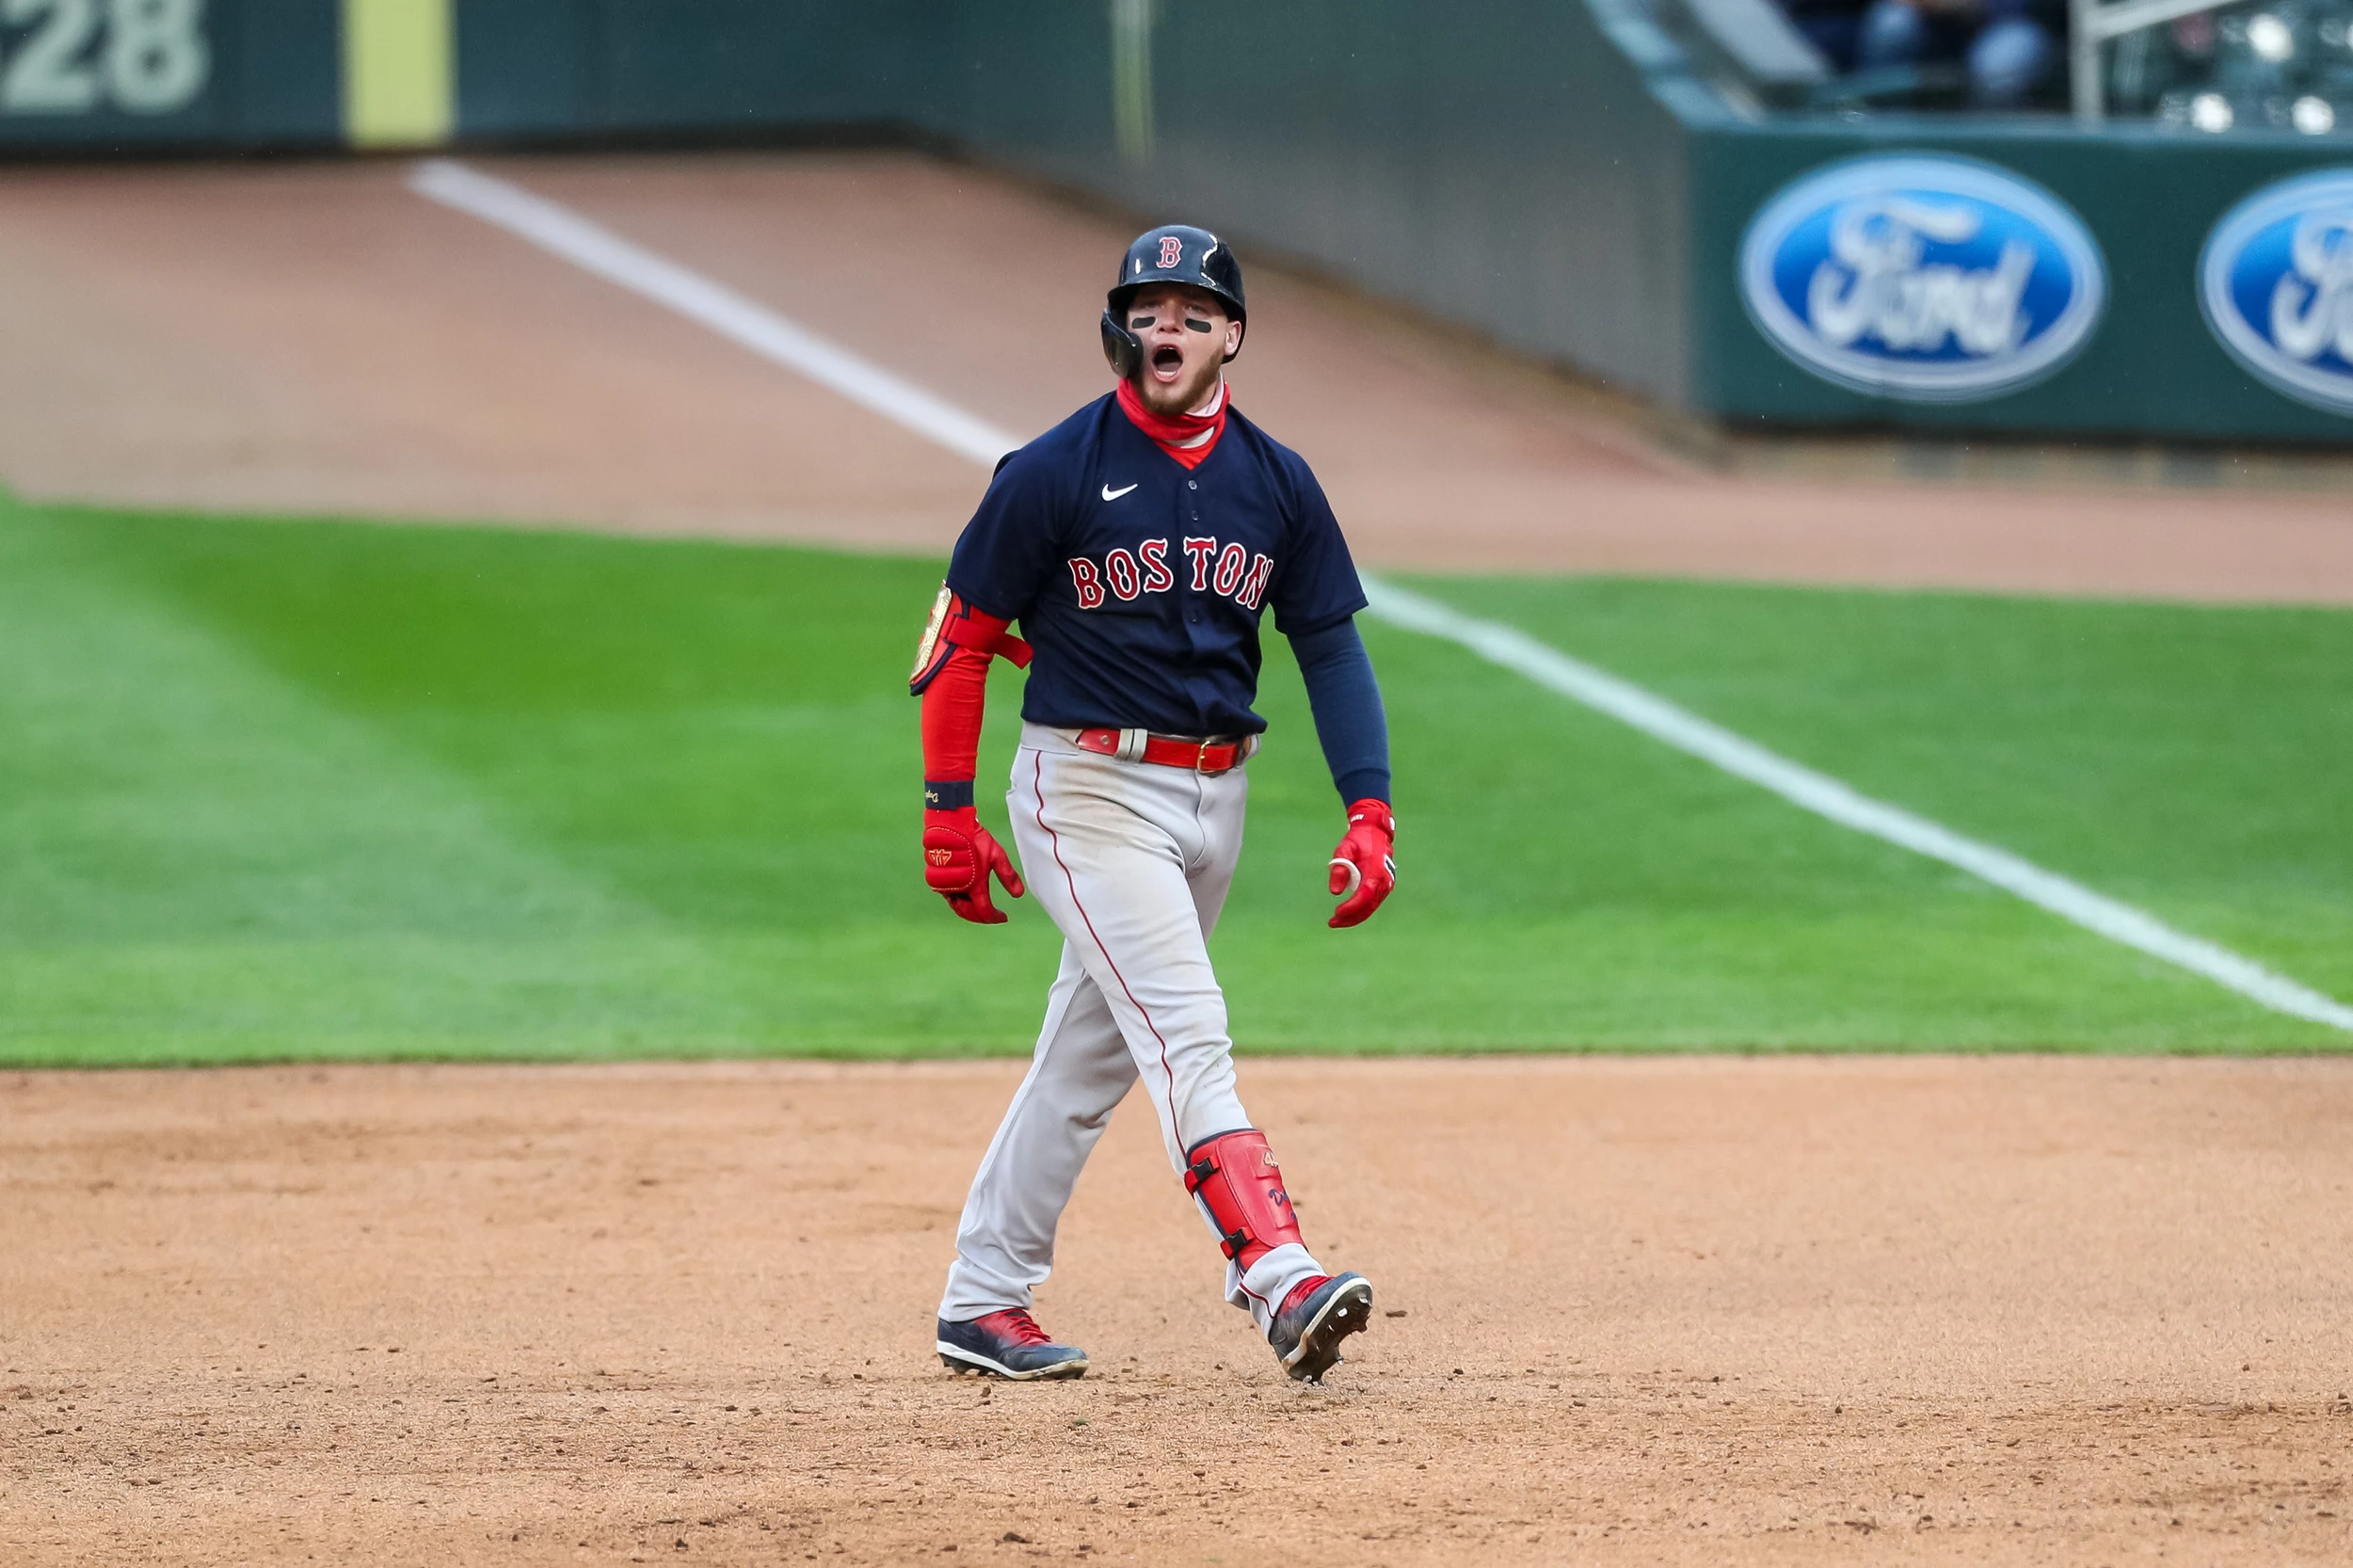 Red Sox overcome triple play in 7-1 victory over major league